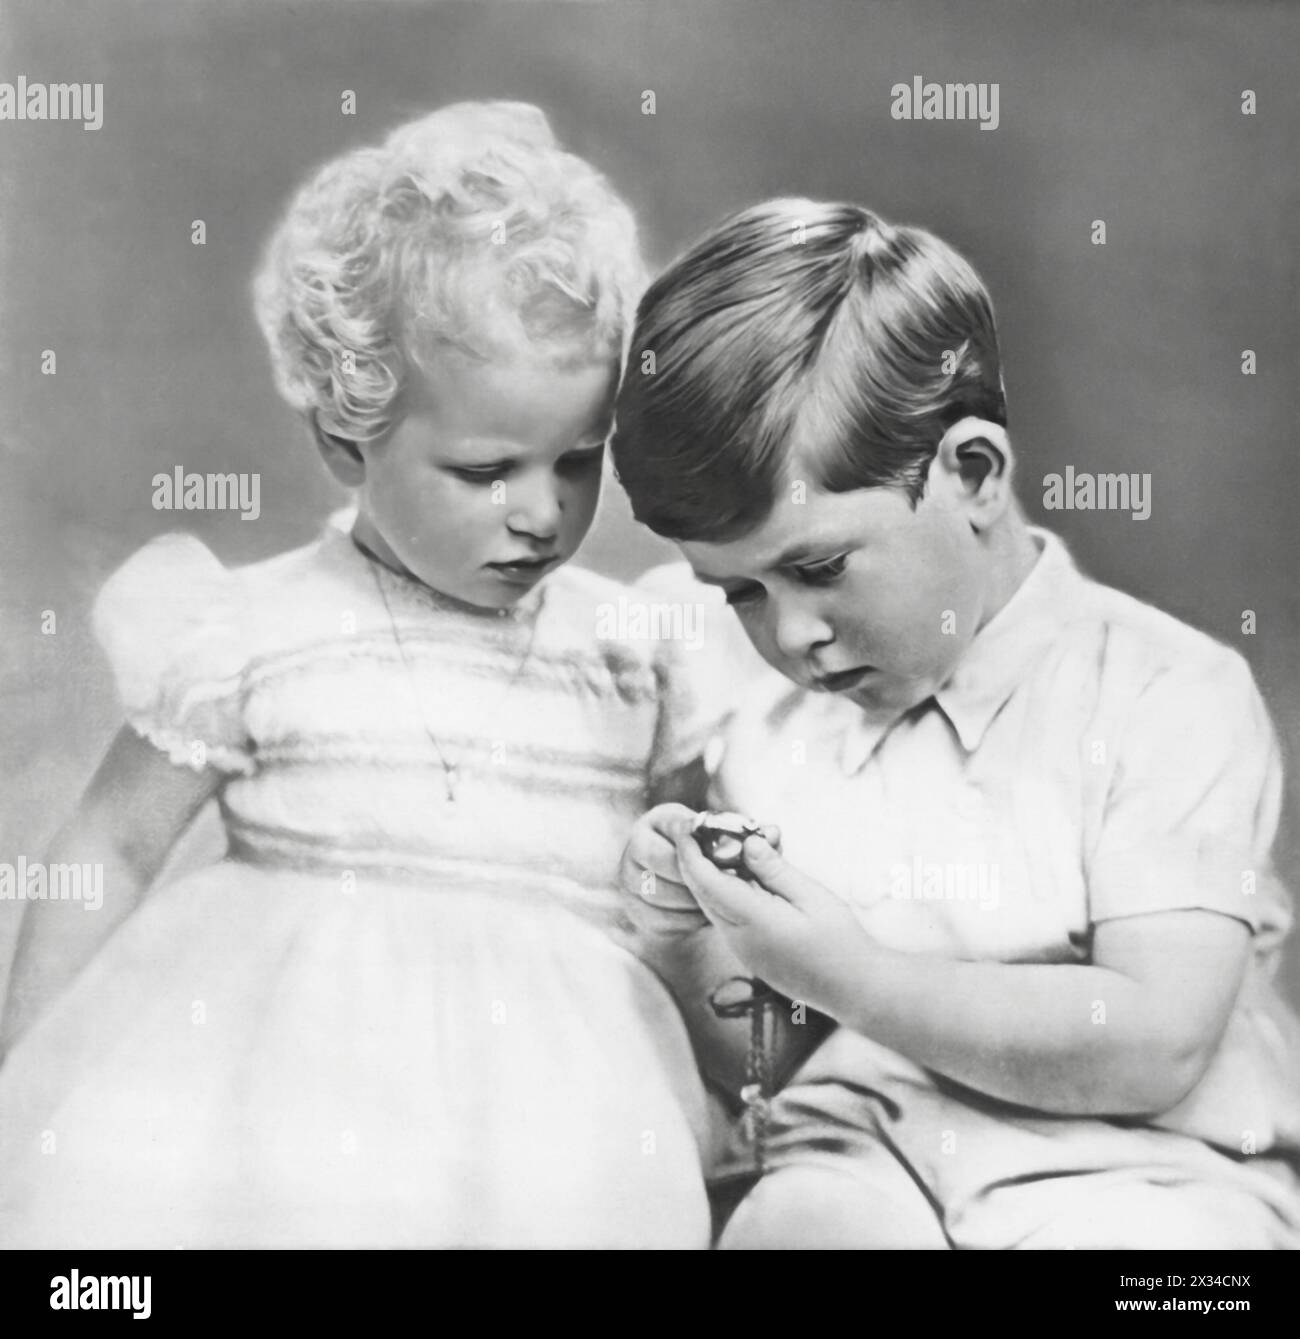 Photograph of a Prince Charles III with his younger sister, Princess Anne, dated circa 1952. This image offers a glimpse into the young royals, prior to their future responsibilties. Stock Photo